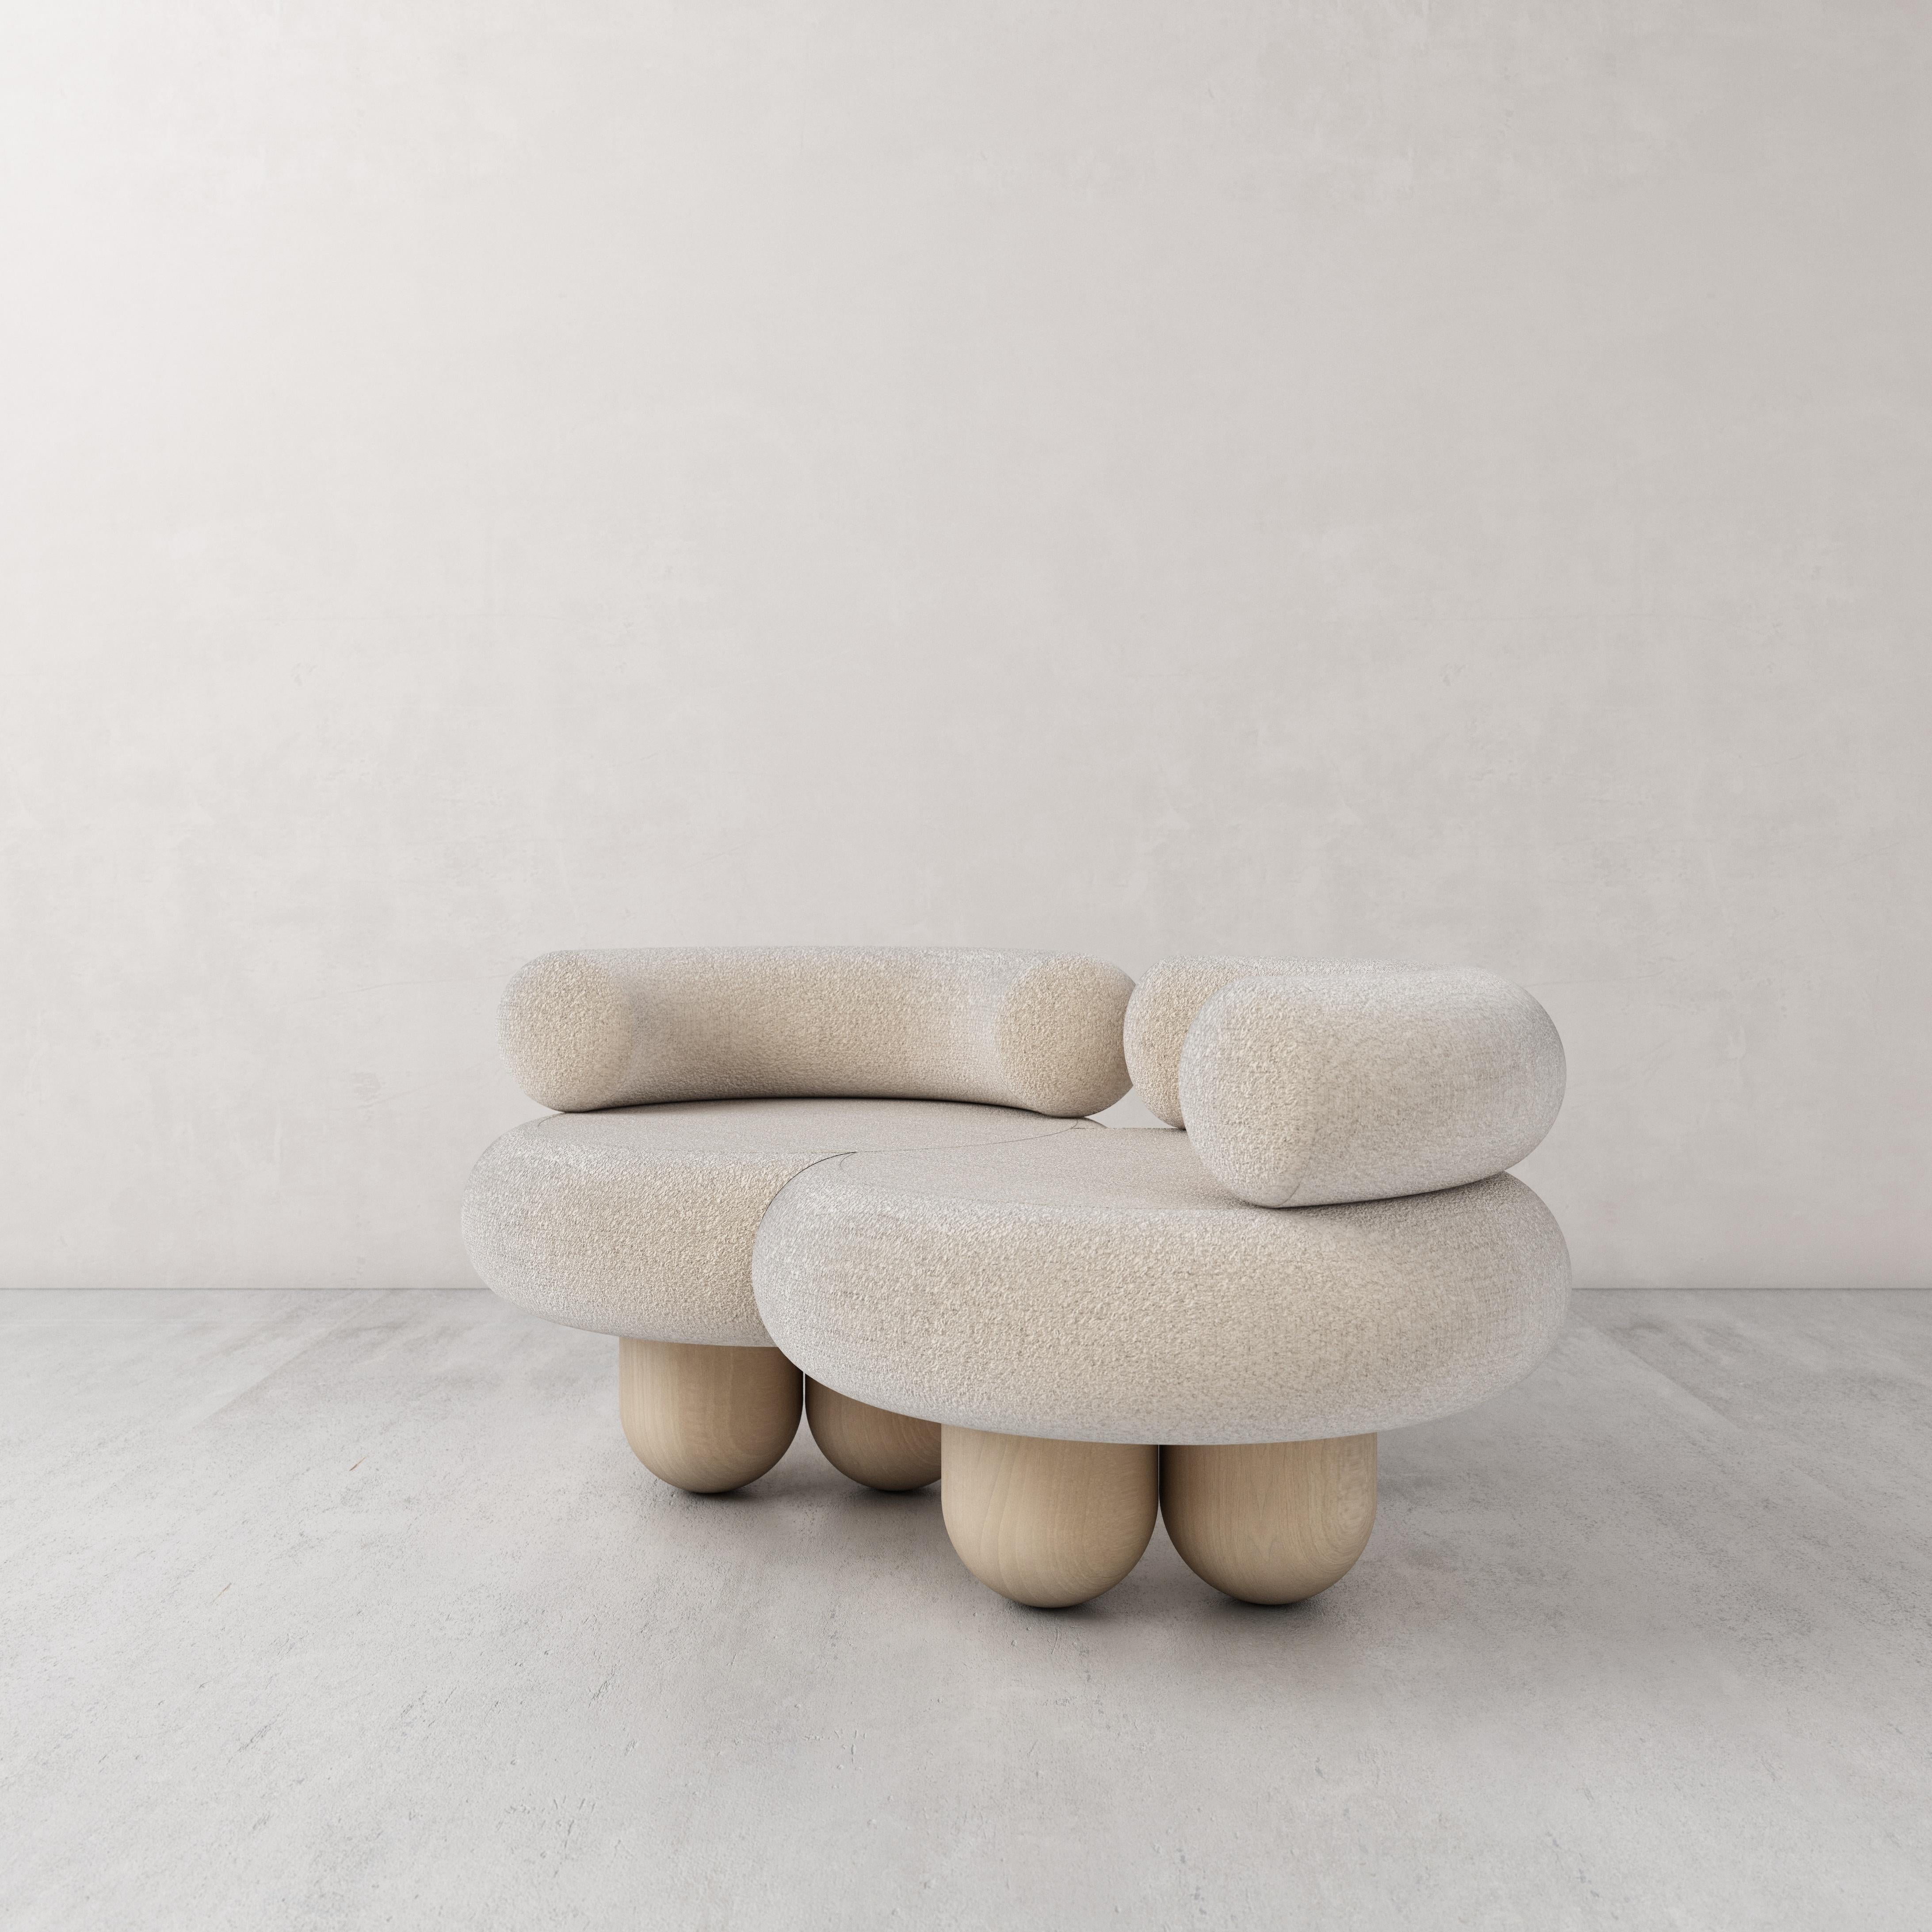 Siamese sofa by Pietro Franceschini
Sold exclusively by Galerie Philia
Manufacturer: Stefano Minotti
Dimensions: W 138 x L 83 x H 43-63cm
Materials: Lamb, ashwood
Also available in Bouclé.

Pietro Franceschini is an architect and designer